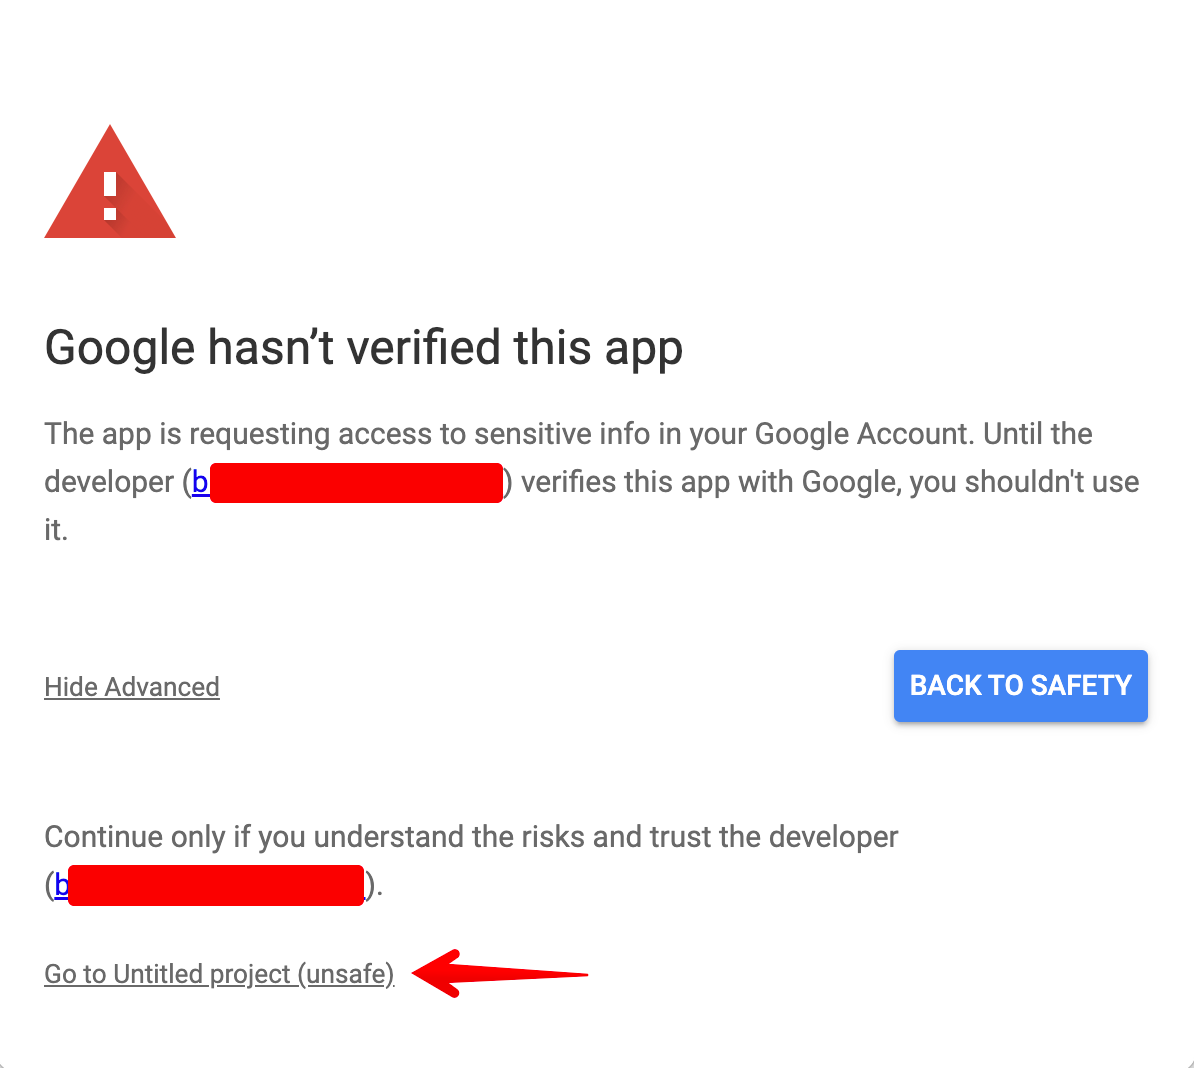 A screenshot of a warning that “Google hasn’t verified this app”, an arrow points to “Go to Untitled project (unsafe)”